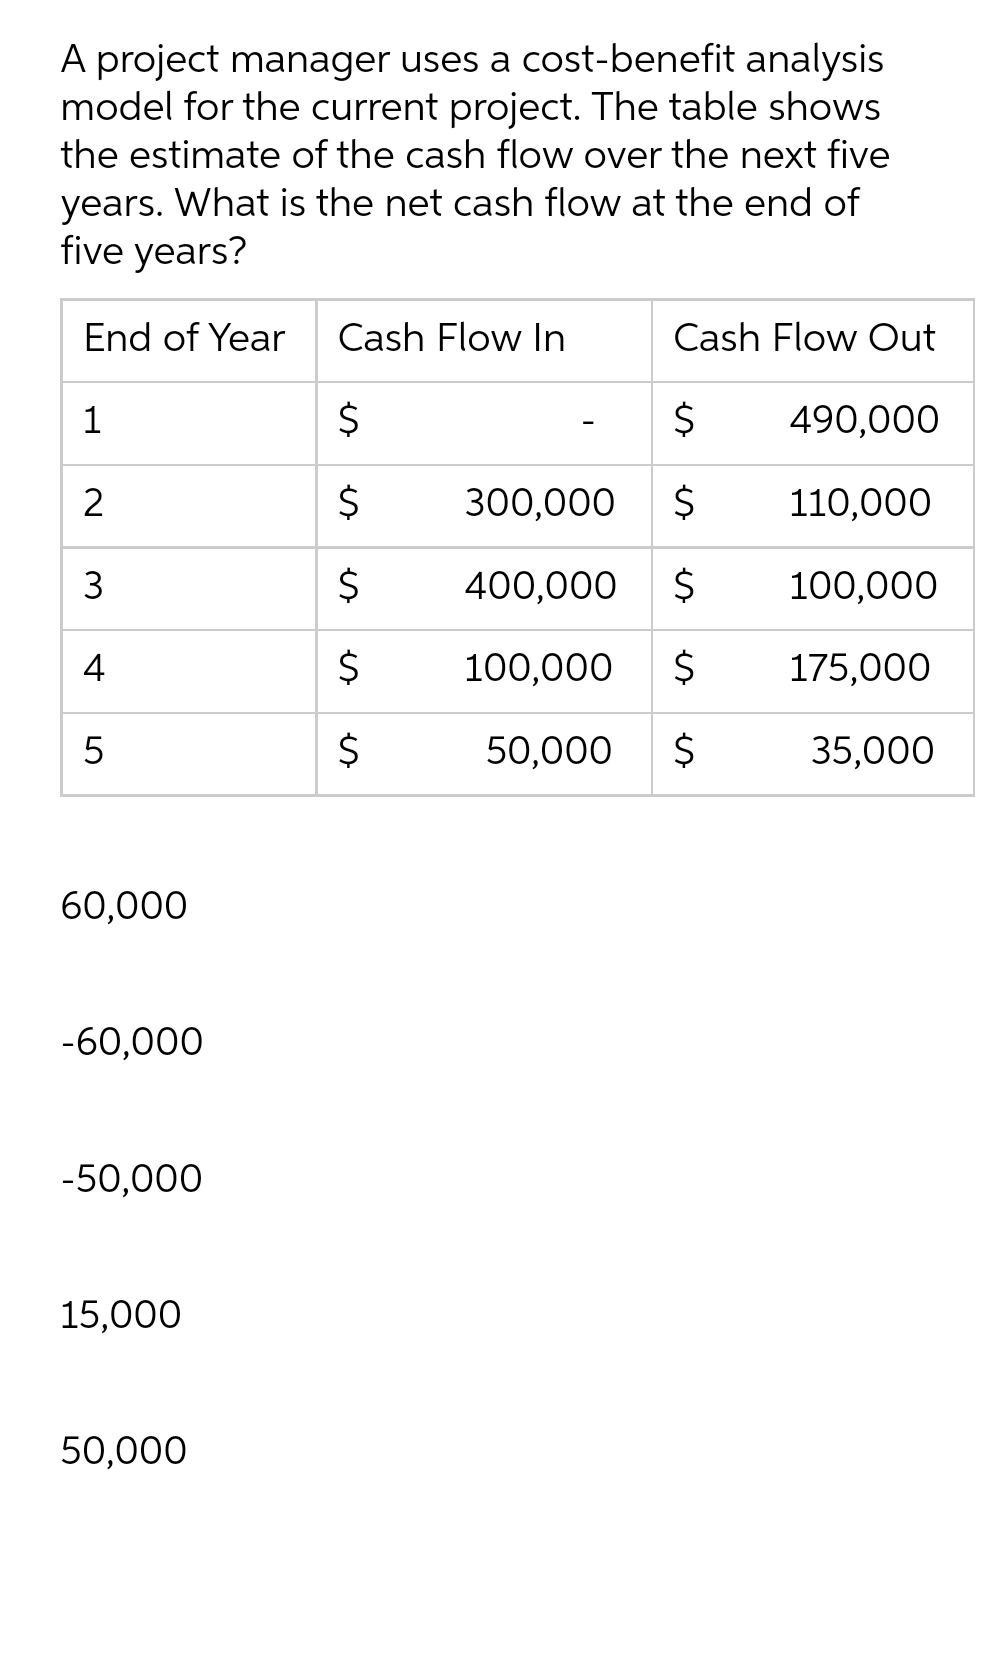 A project manager uses a cost-benefit analysis
model for the current project. The table shows
the estimate of the cash flow over the next five
years. What is the net cash flow at the end of
five years?
End of Year Cash Flow In
1
2
3
4
5
60,000
-60,000
-50,000
15,000
50,000
$
Ś
es
$
$
$
es
Cash Flow Out
$
300,000
$
400,000 $
100,000 $
50,000 $
490,000
110,000
100,000
175,000
35,000